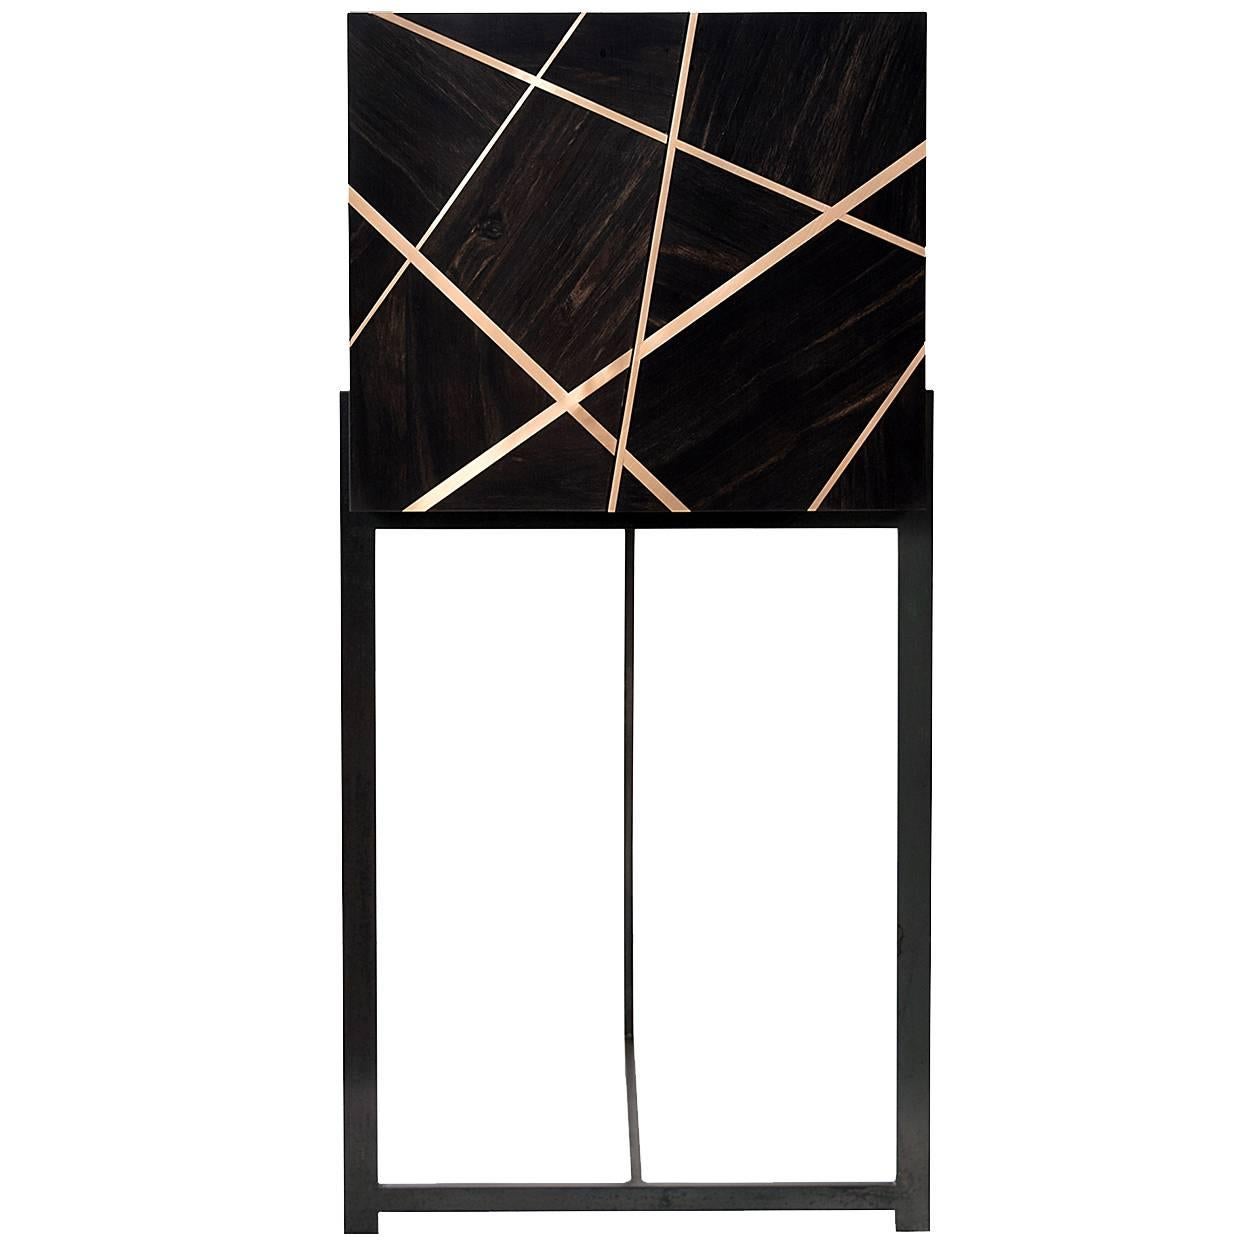 The ray cabinet in ebony and bronze is created to be a notable accent piece. It is at once rich, luxurious and complicated, while maintaining a serious and serene form.

Gabon ebony is a member of the diospyros family and comes from northern